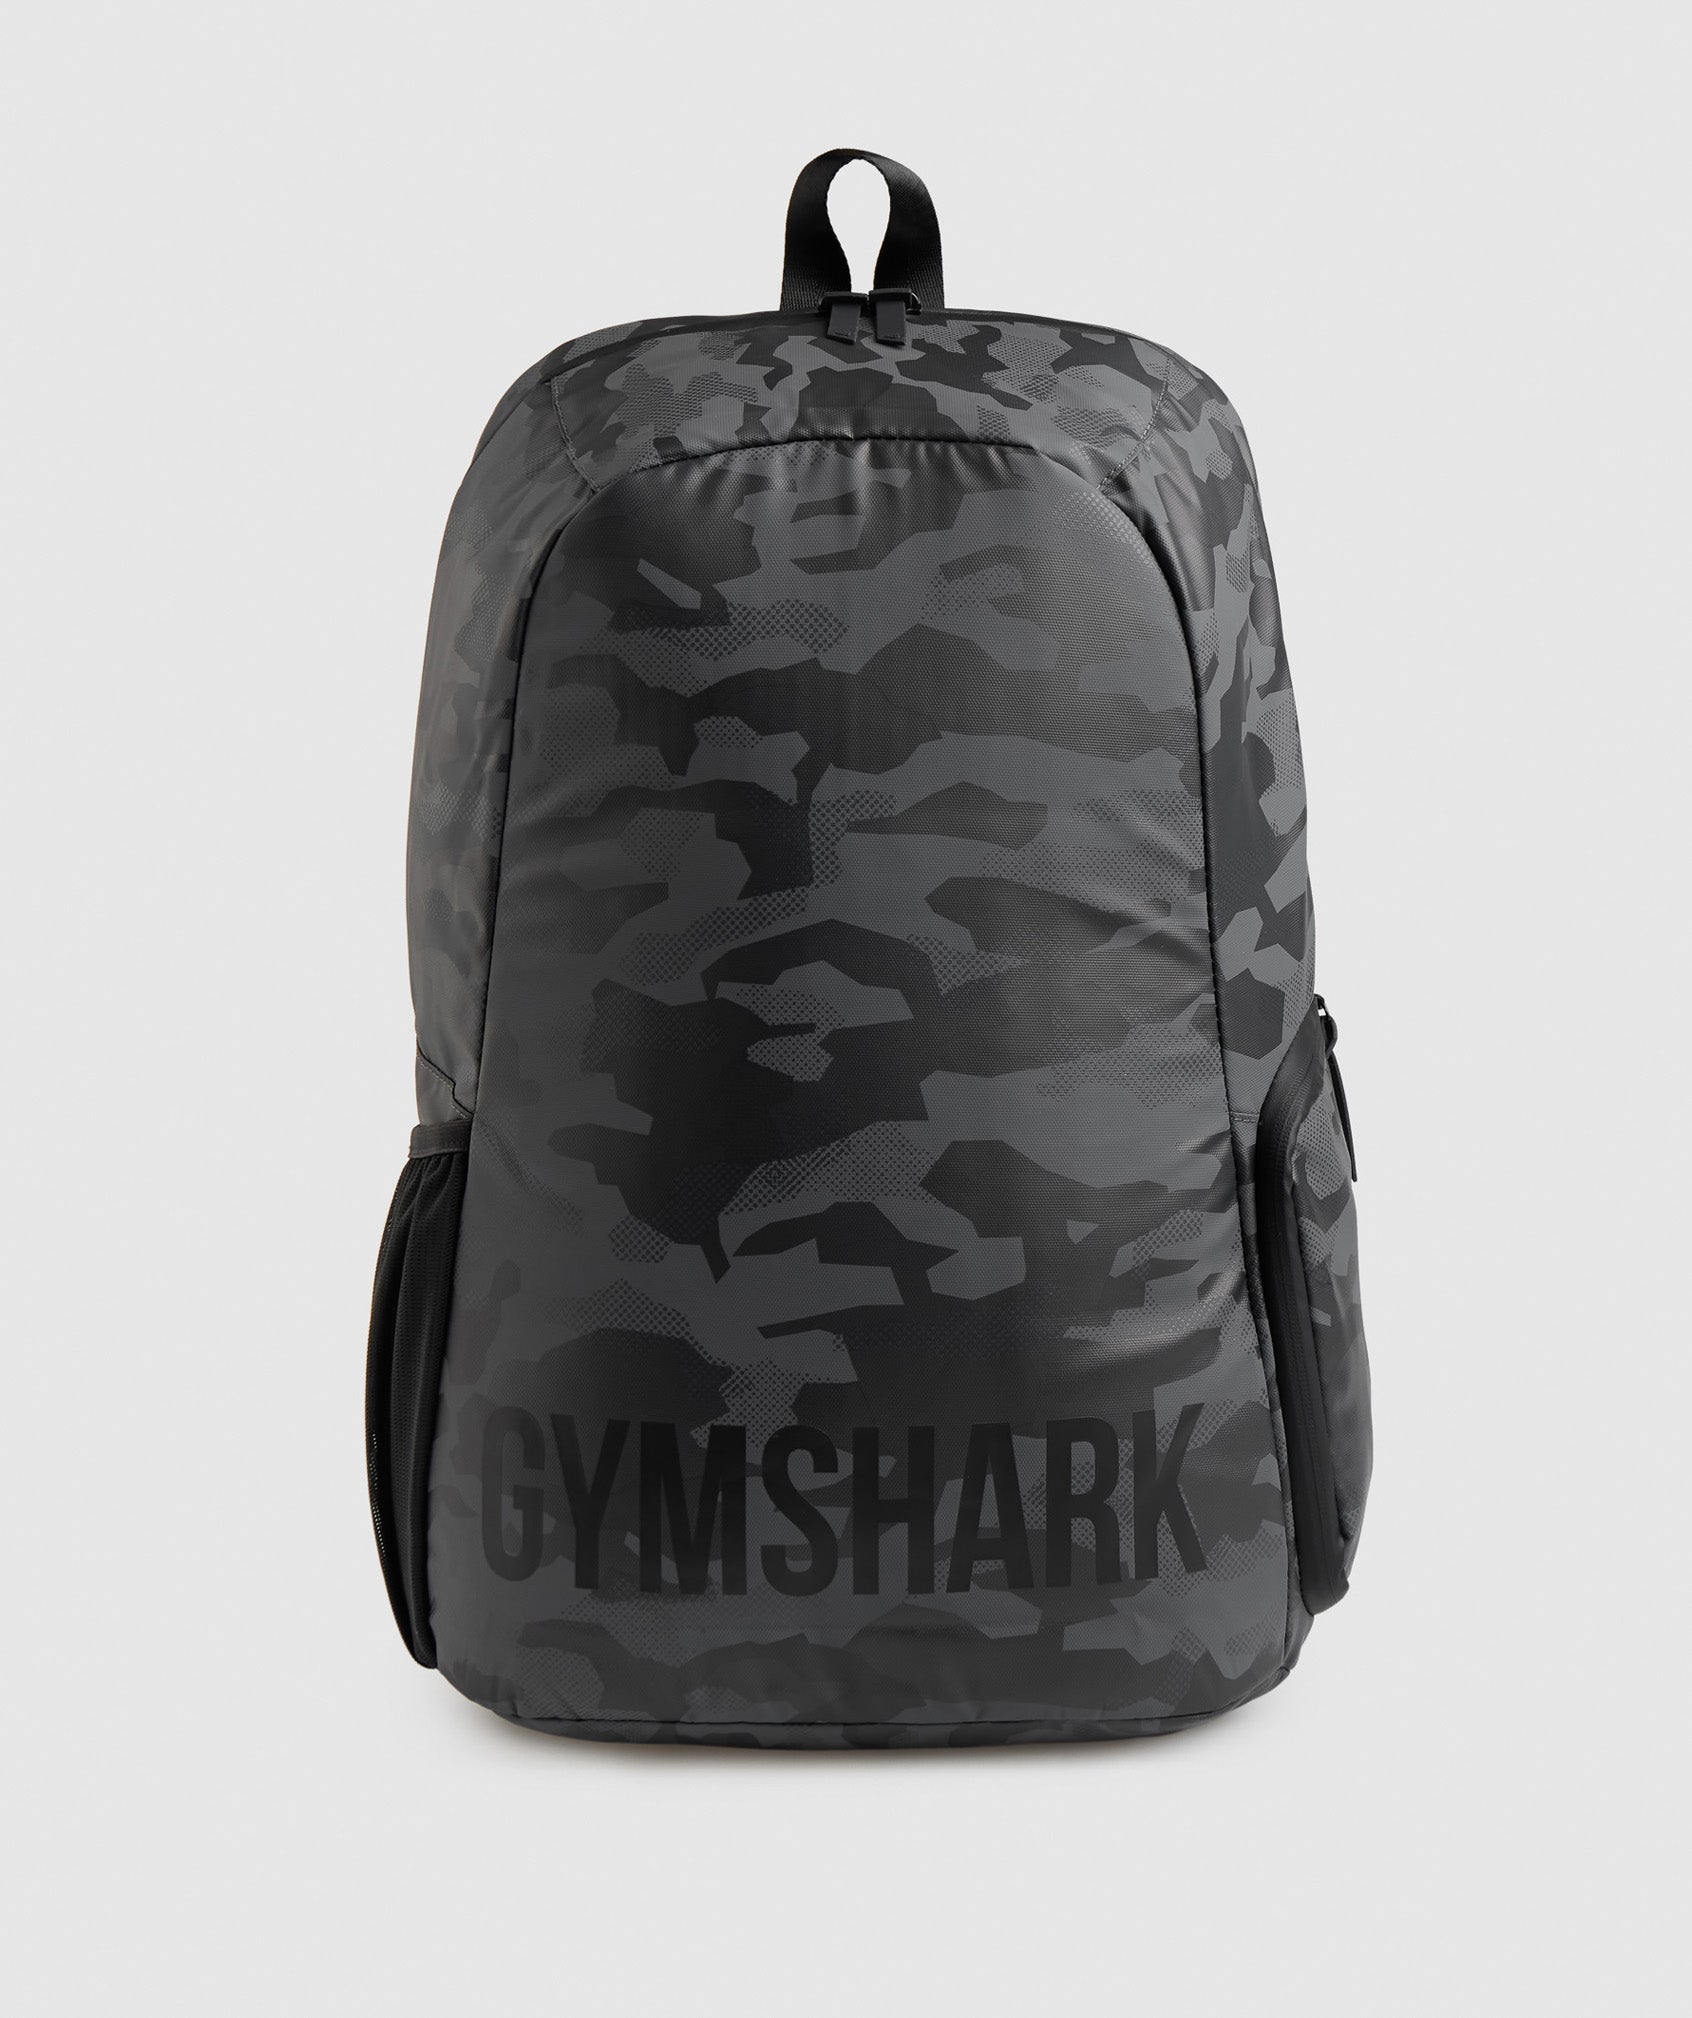 Best Selling Shopify Products on eu.gymshark.com-2